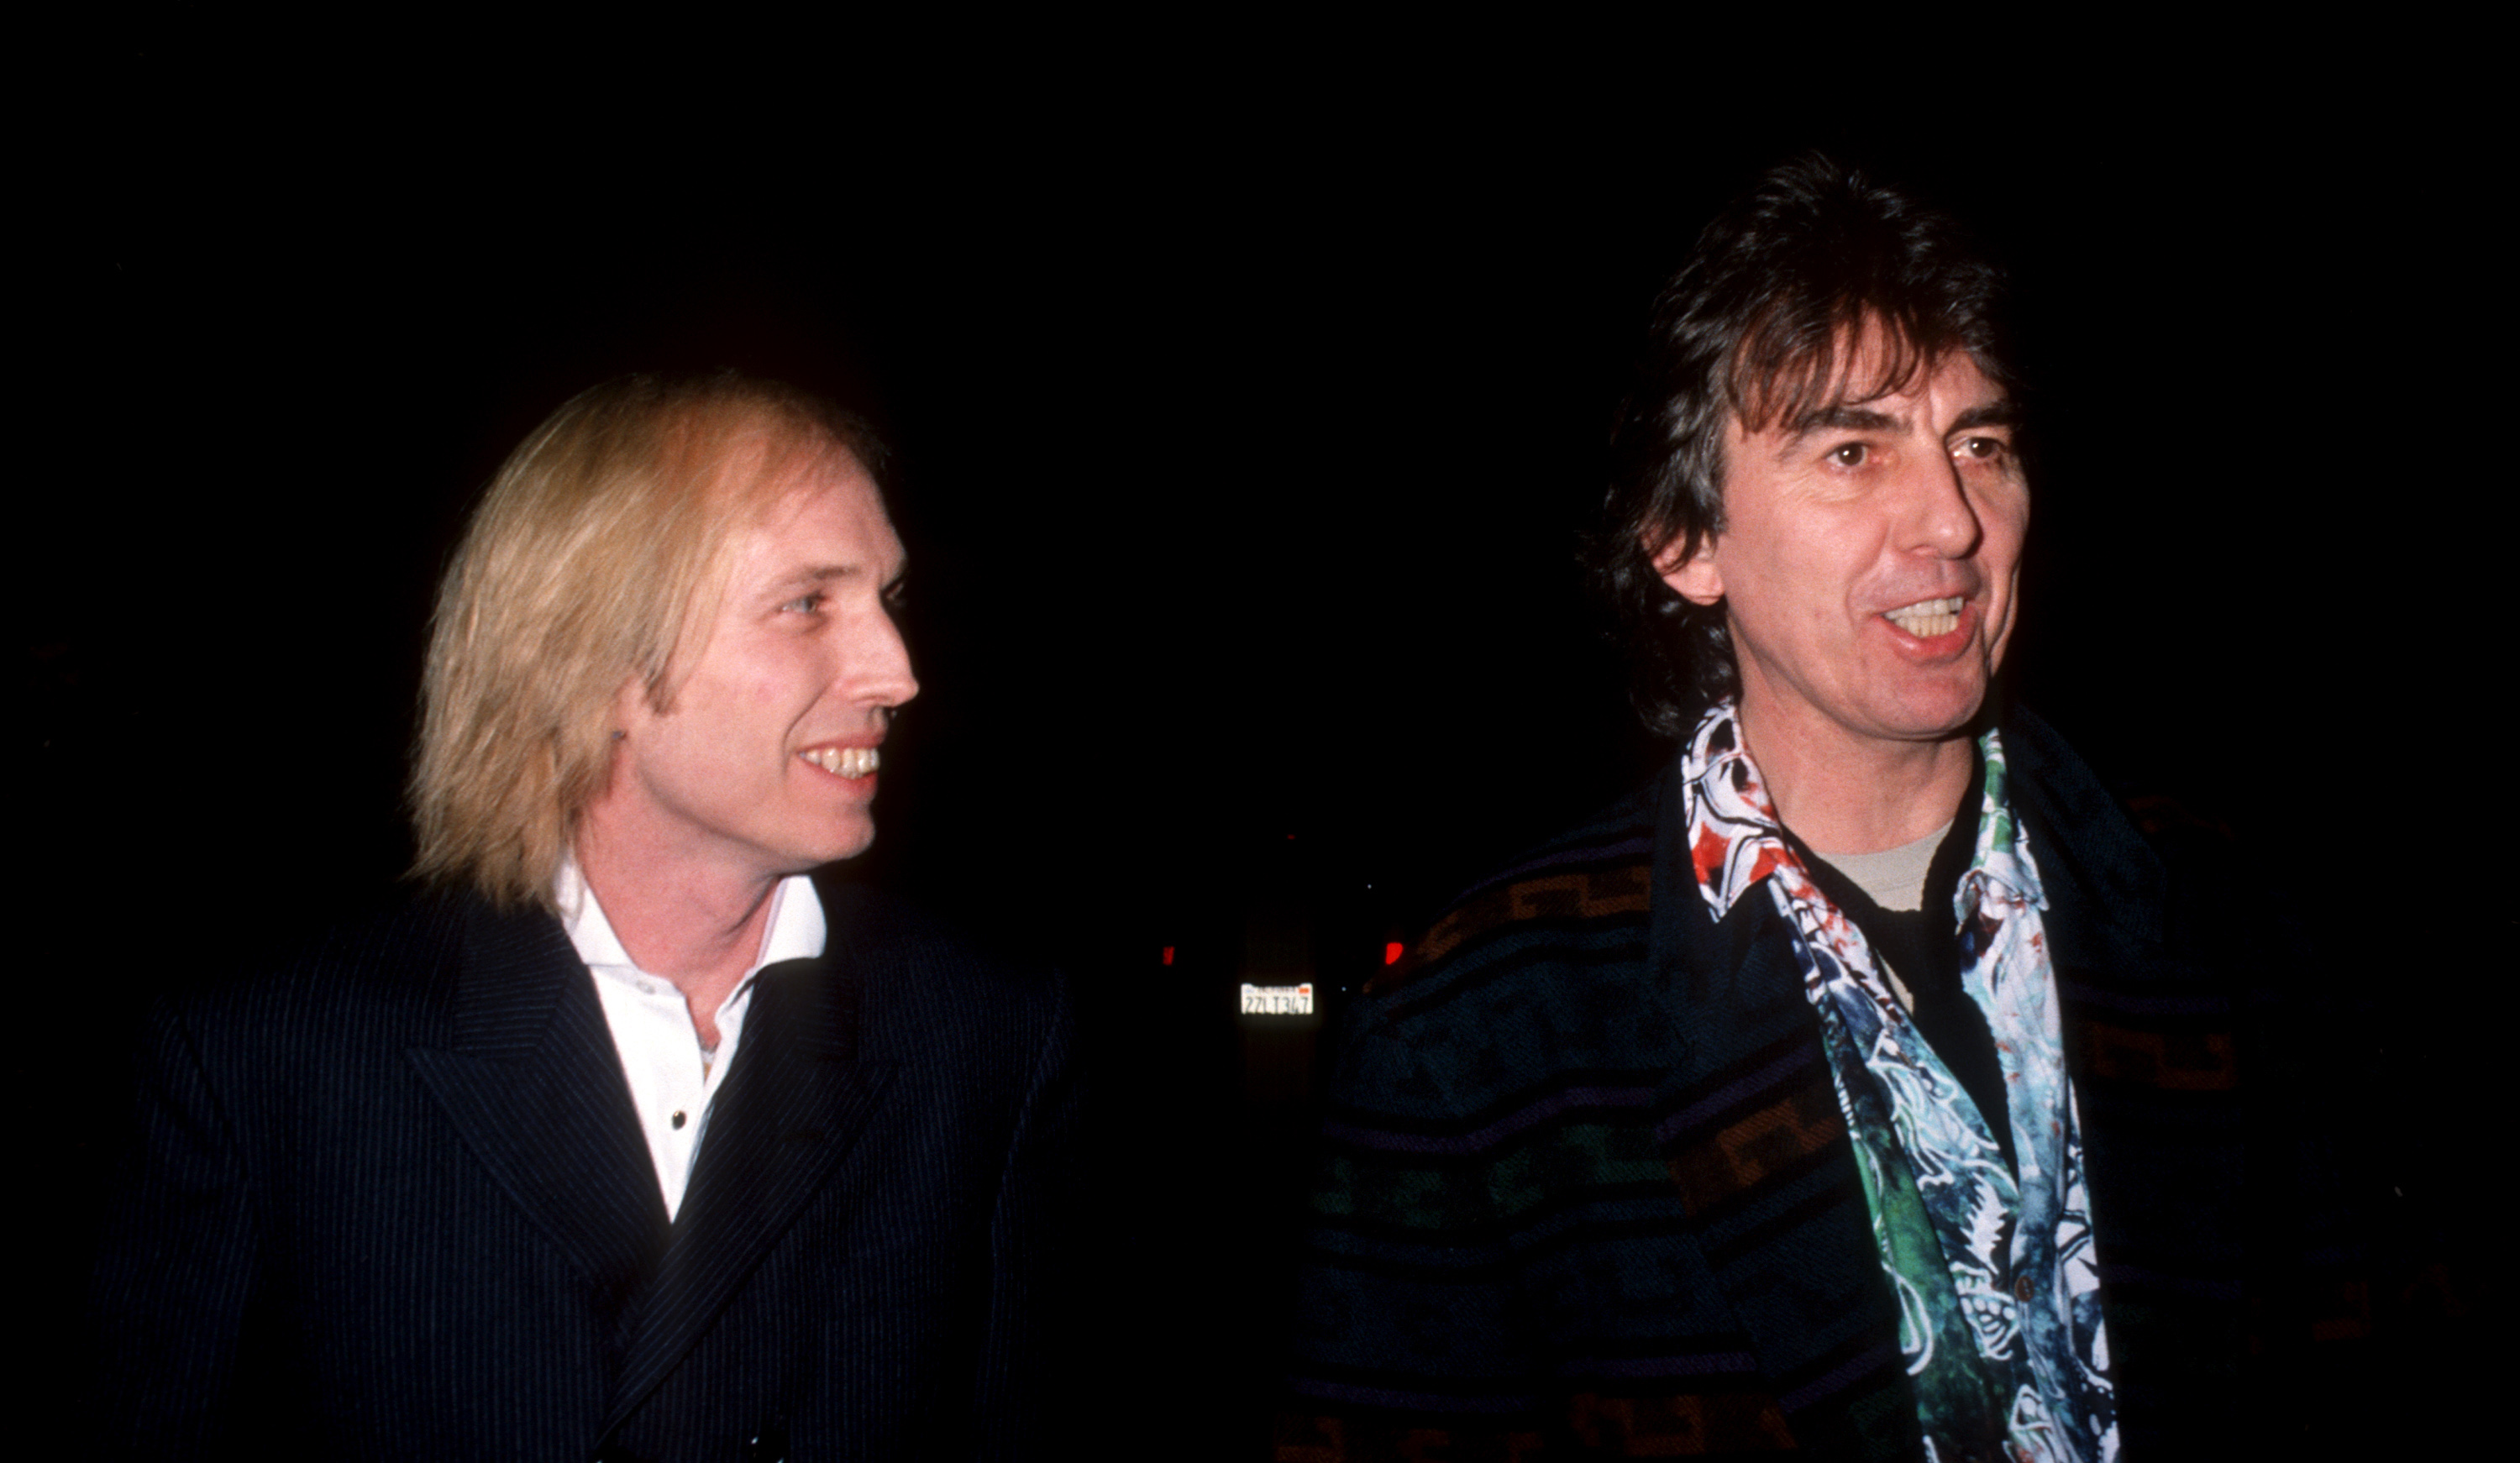 Tom Petty and George Harrison wear black jackets and walk together.